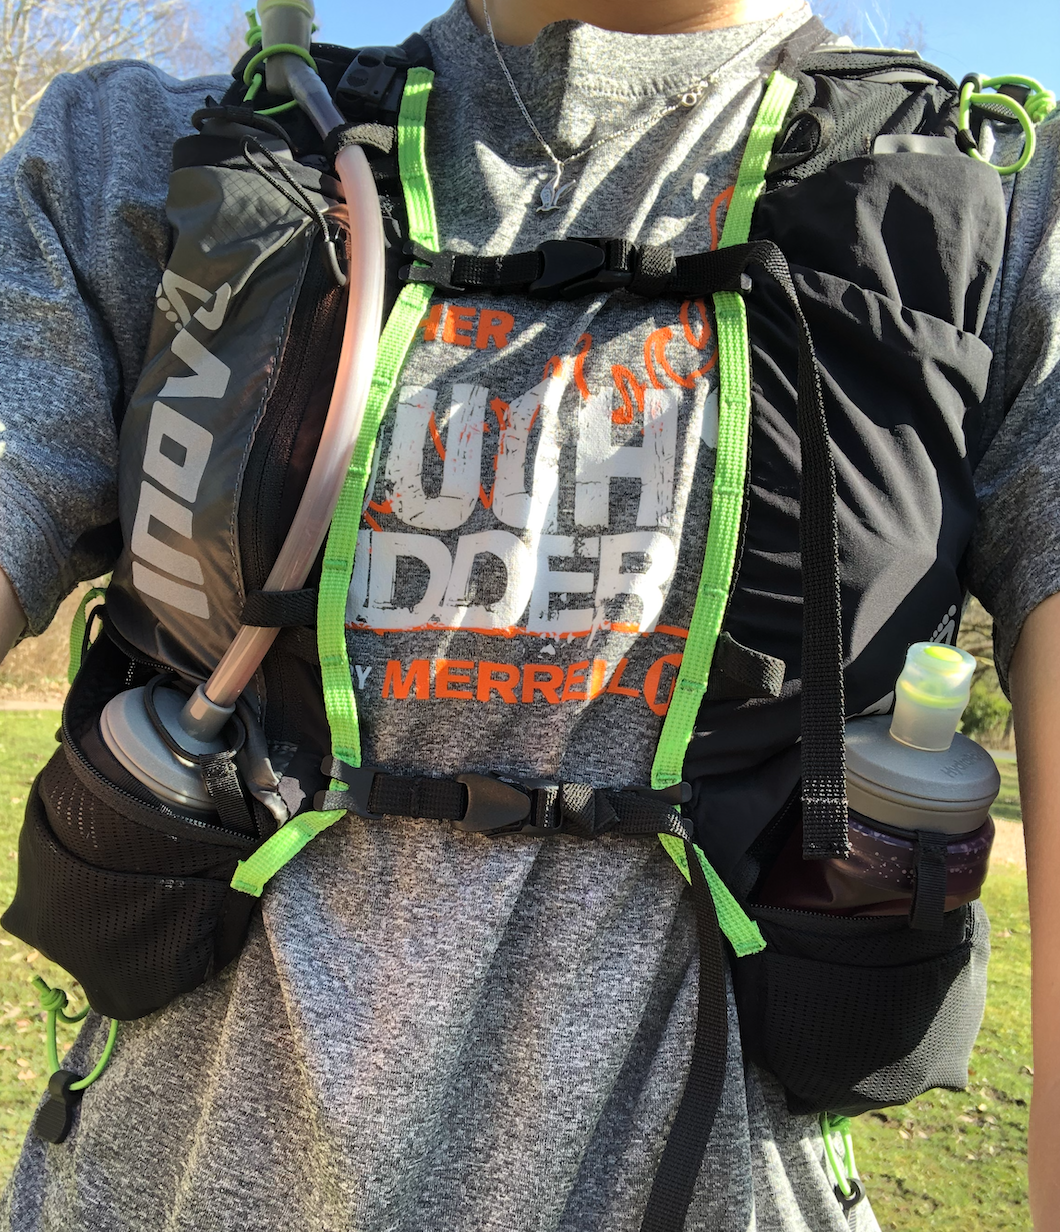 krater skulder trend Race ultra Pro 2in1 Vest Review - By MTD Athlete - E, Bambi, The tall one  with Blonde hair. — Maverick Race